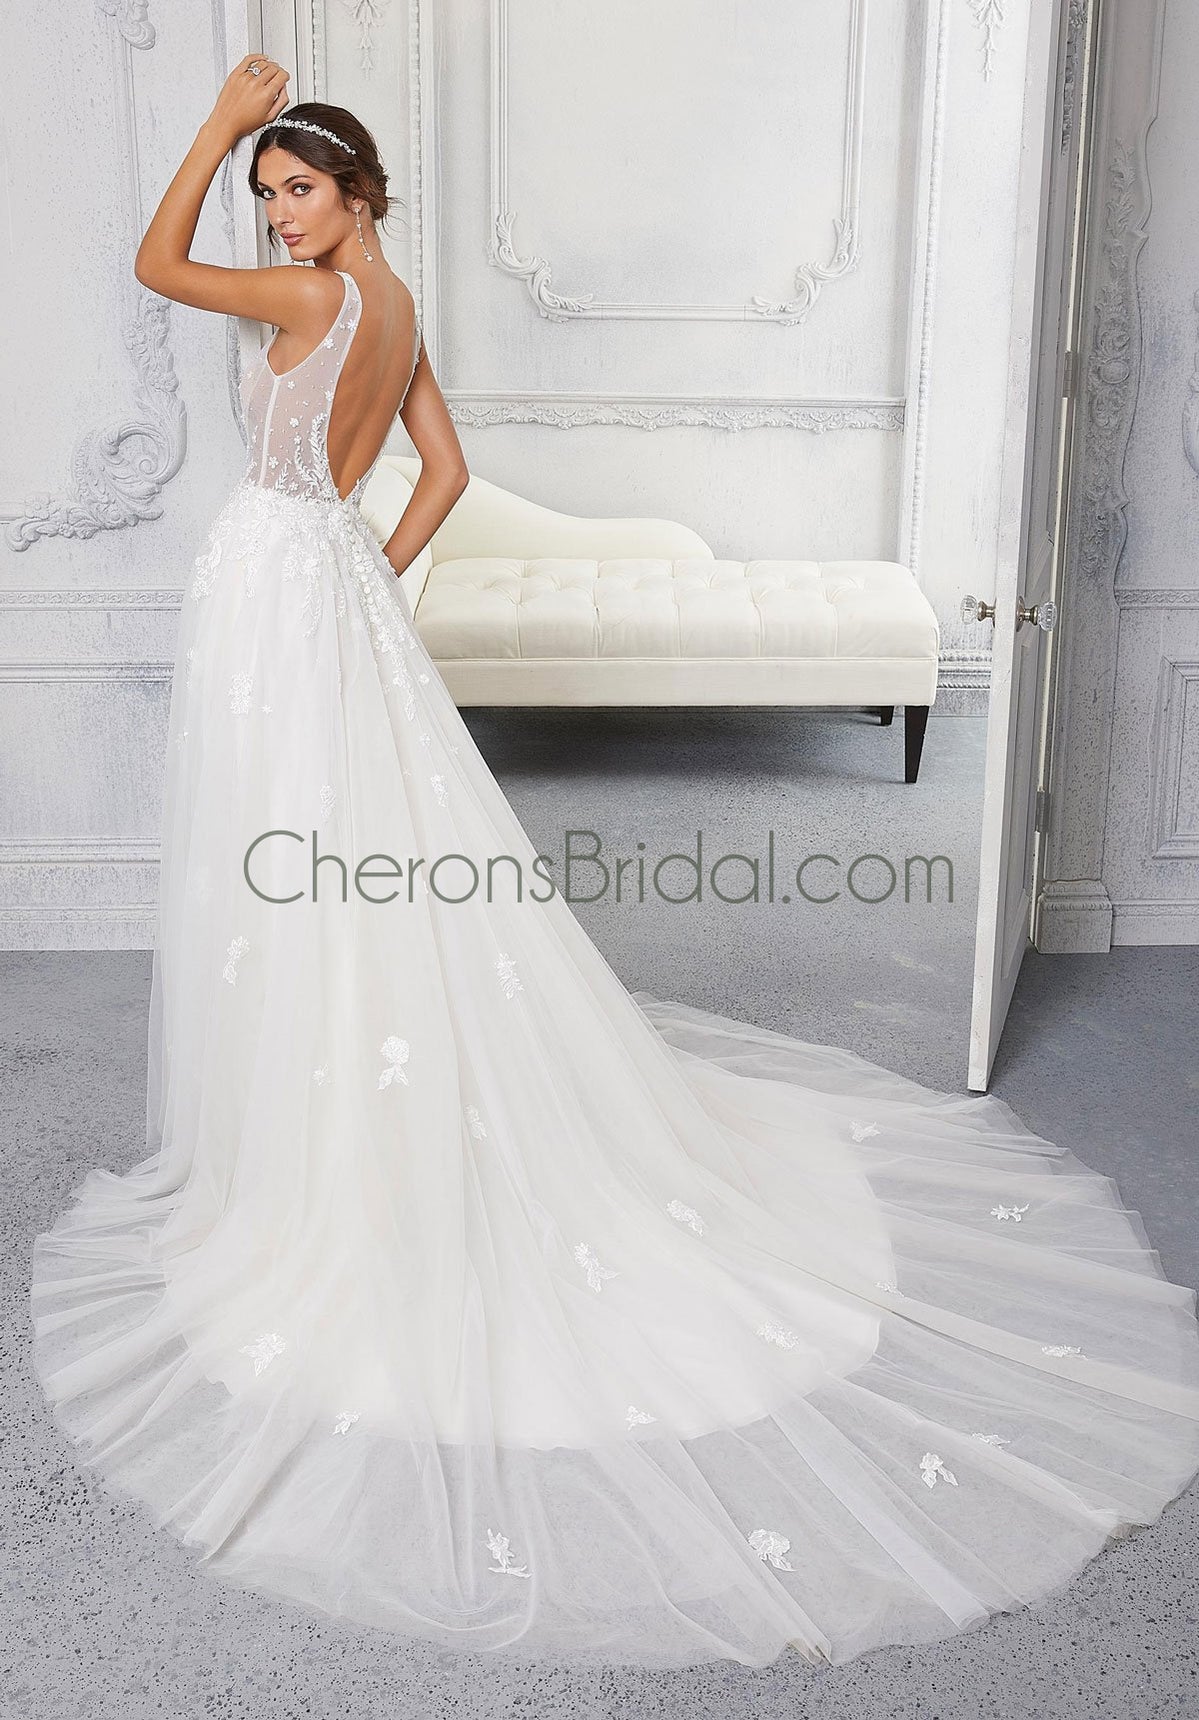 Blu - 5922 - Candice - Cheron's Bridal, Wedding Gown - Morilee Blu - - Wedding Gowns Dresses Chattanooga Hixson Shops Boutiques Tennessee TN Georgia GA MSRP Lowest Prices Sale Discount